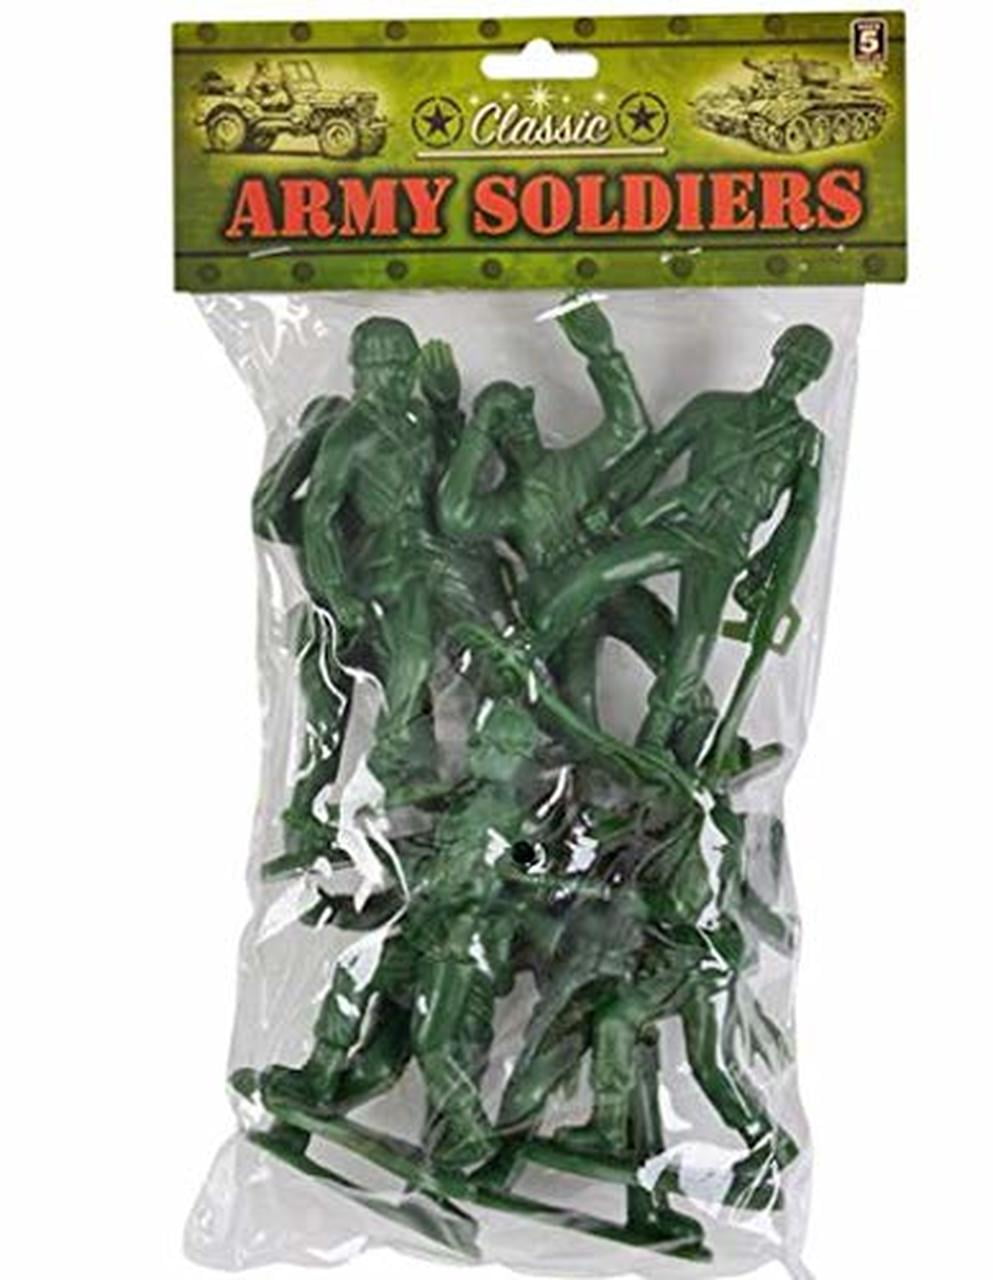 Plastic Toy Army Soldiers 3 1/2 Pound Lot Vintage Play Military 